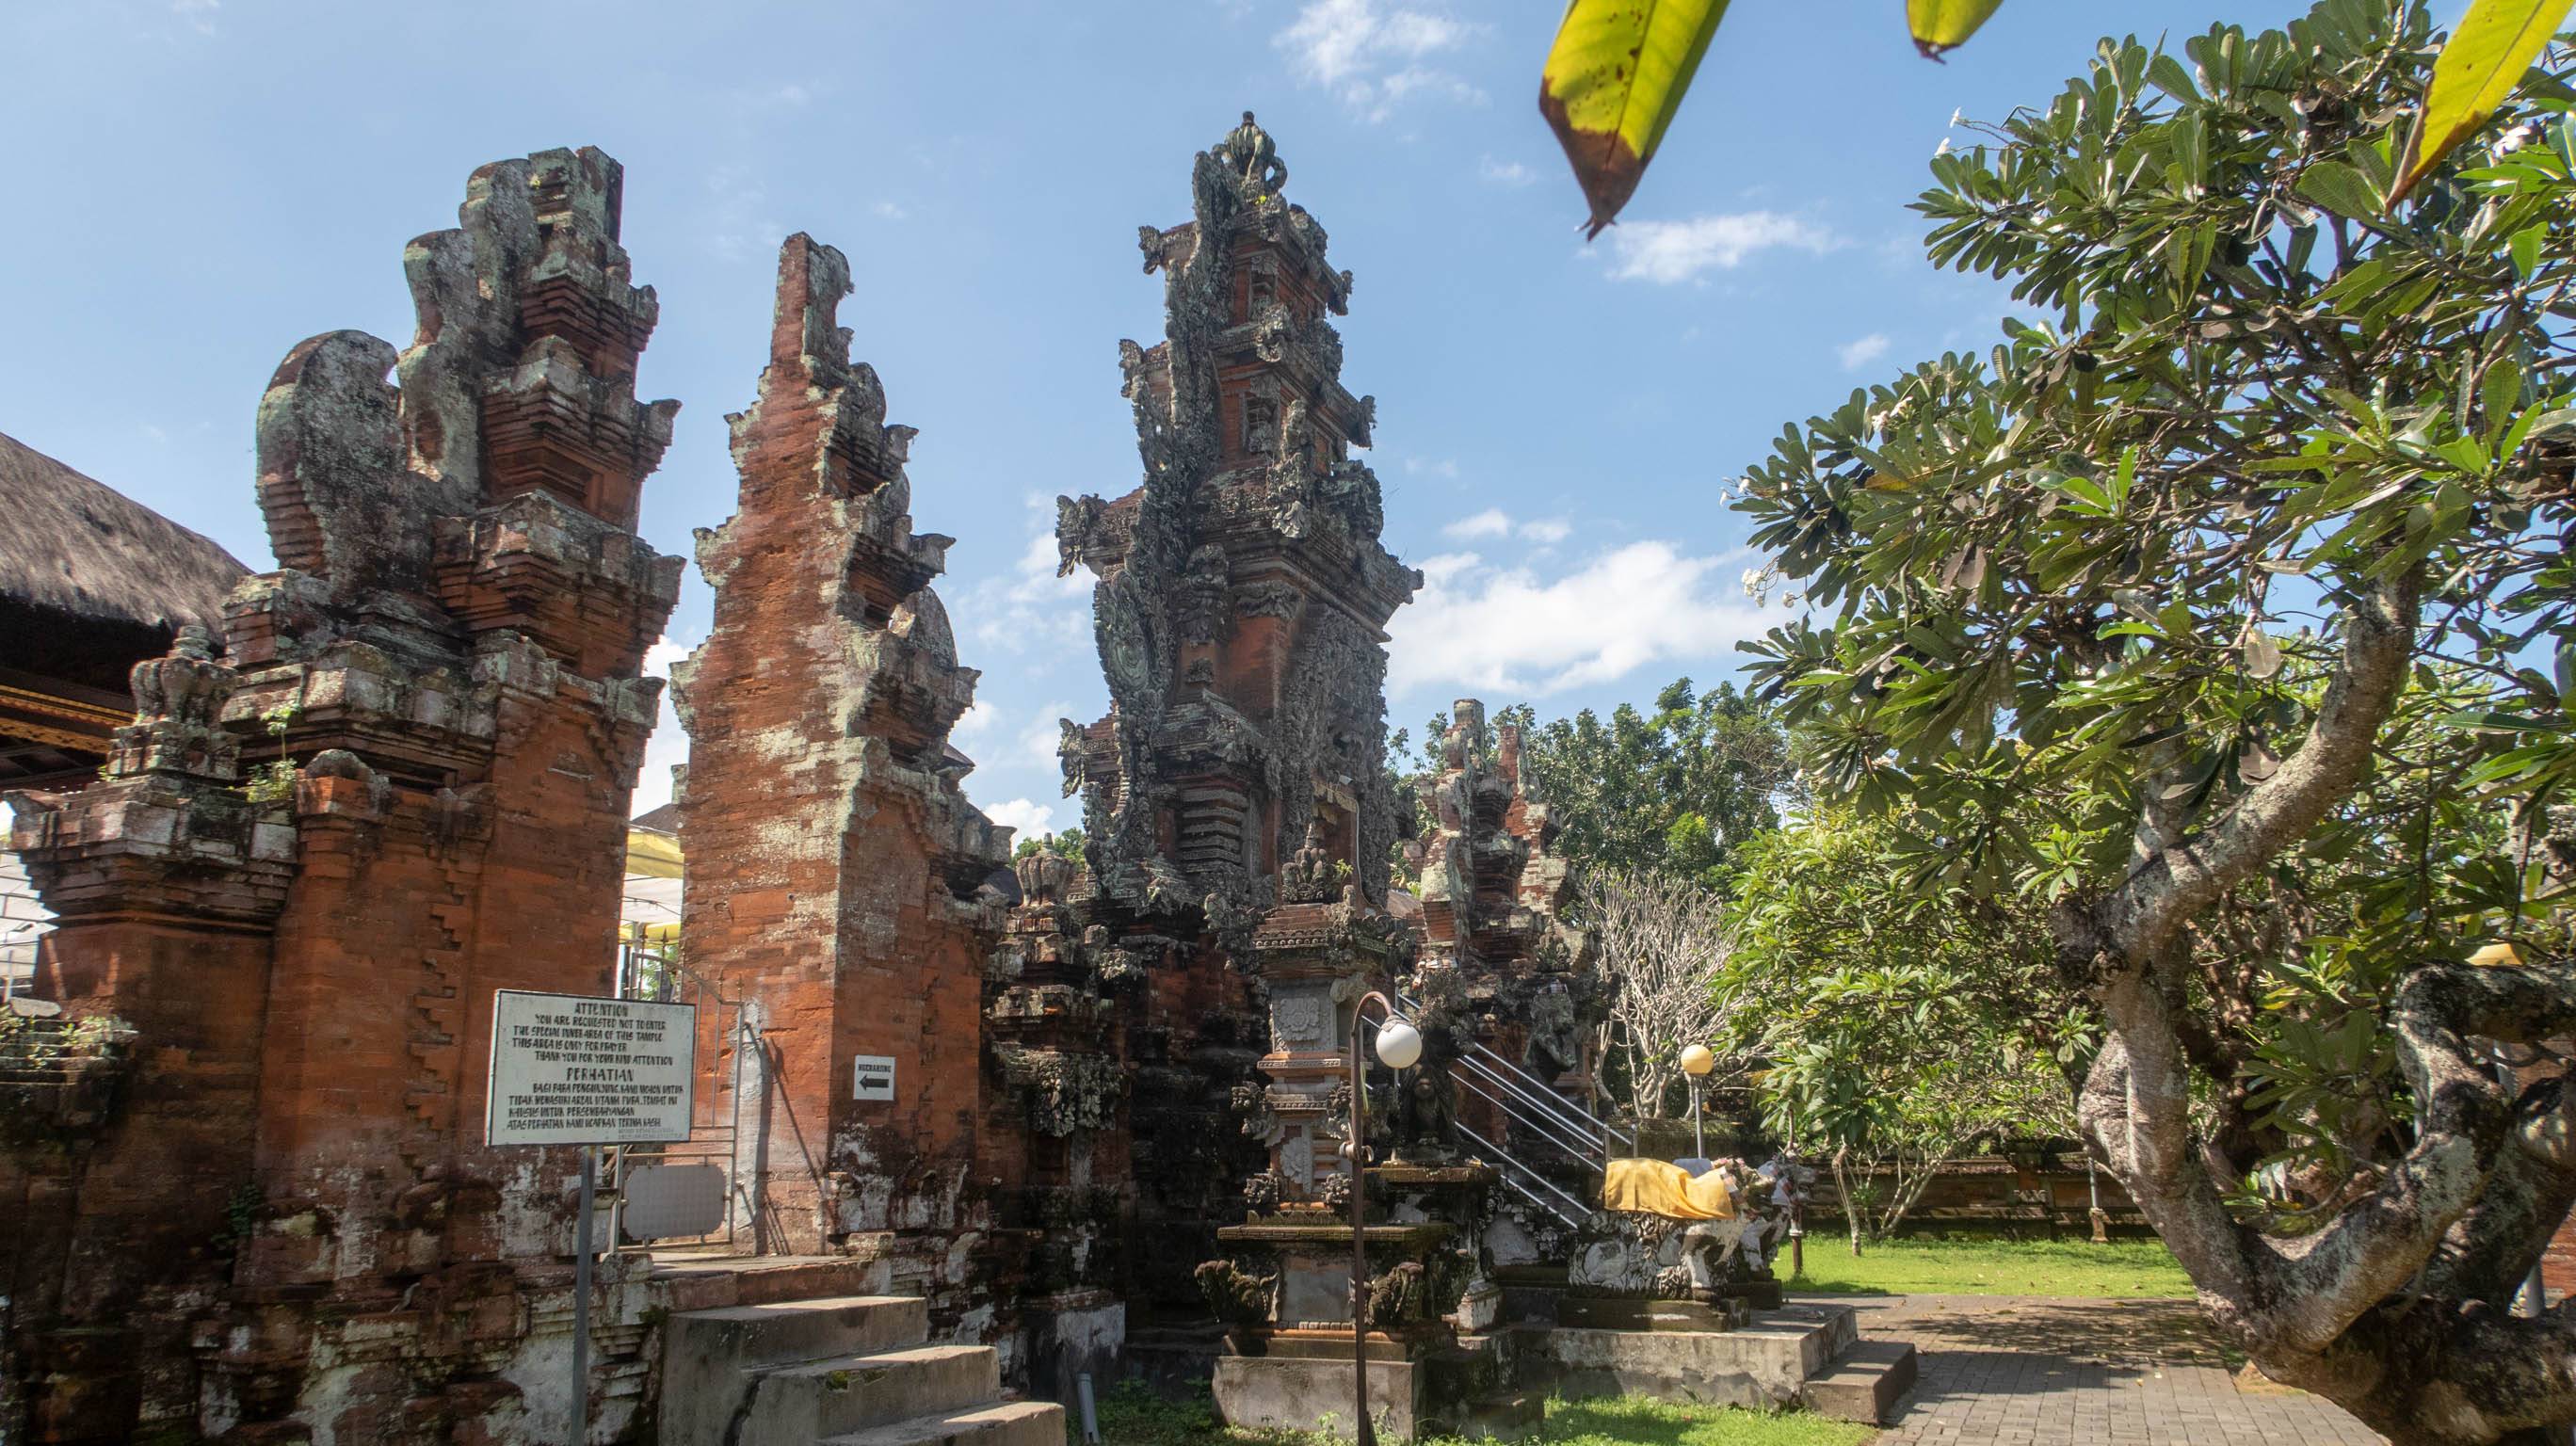 The main gate to the inner yard of the Rambut Siwi Temple